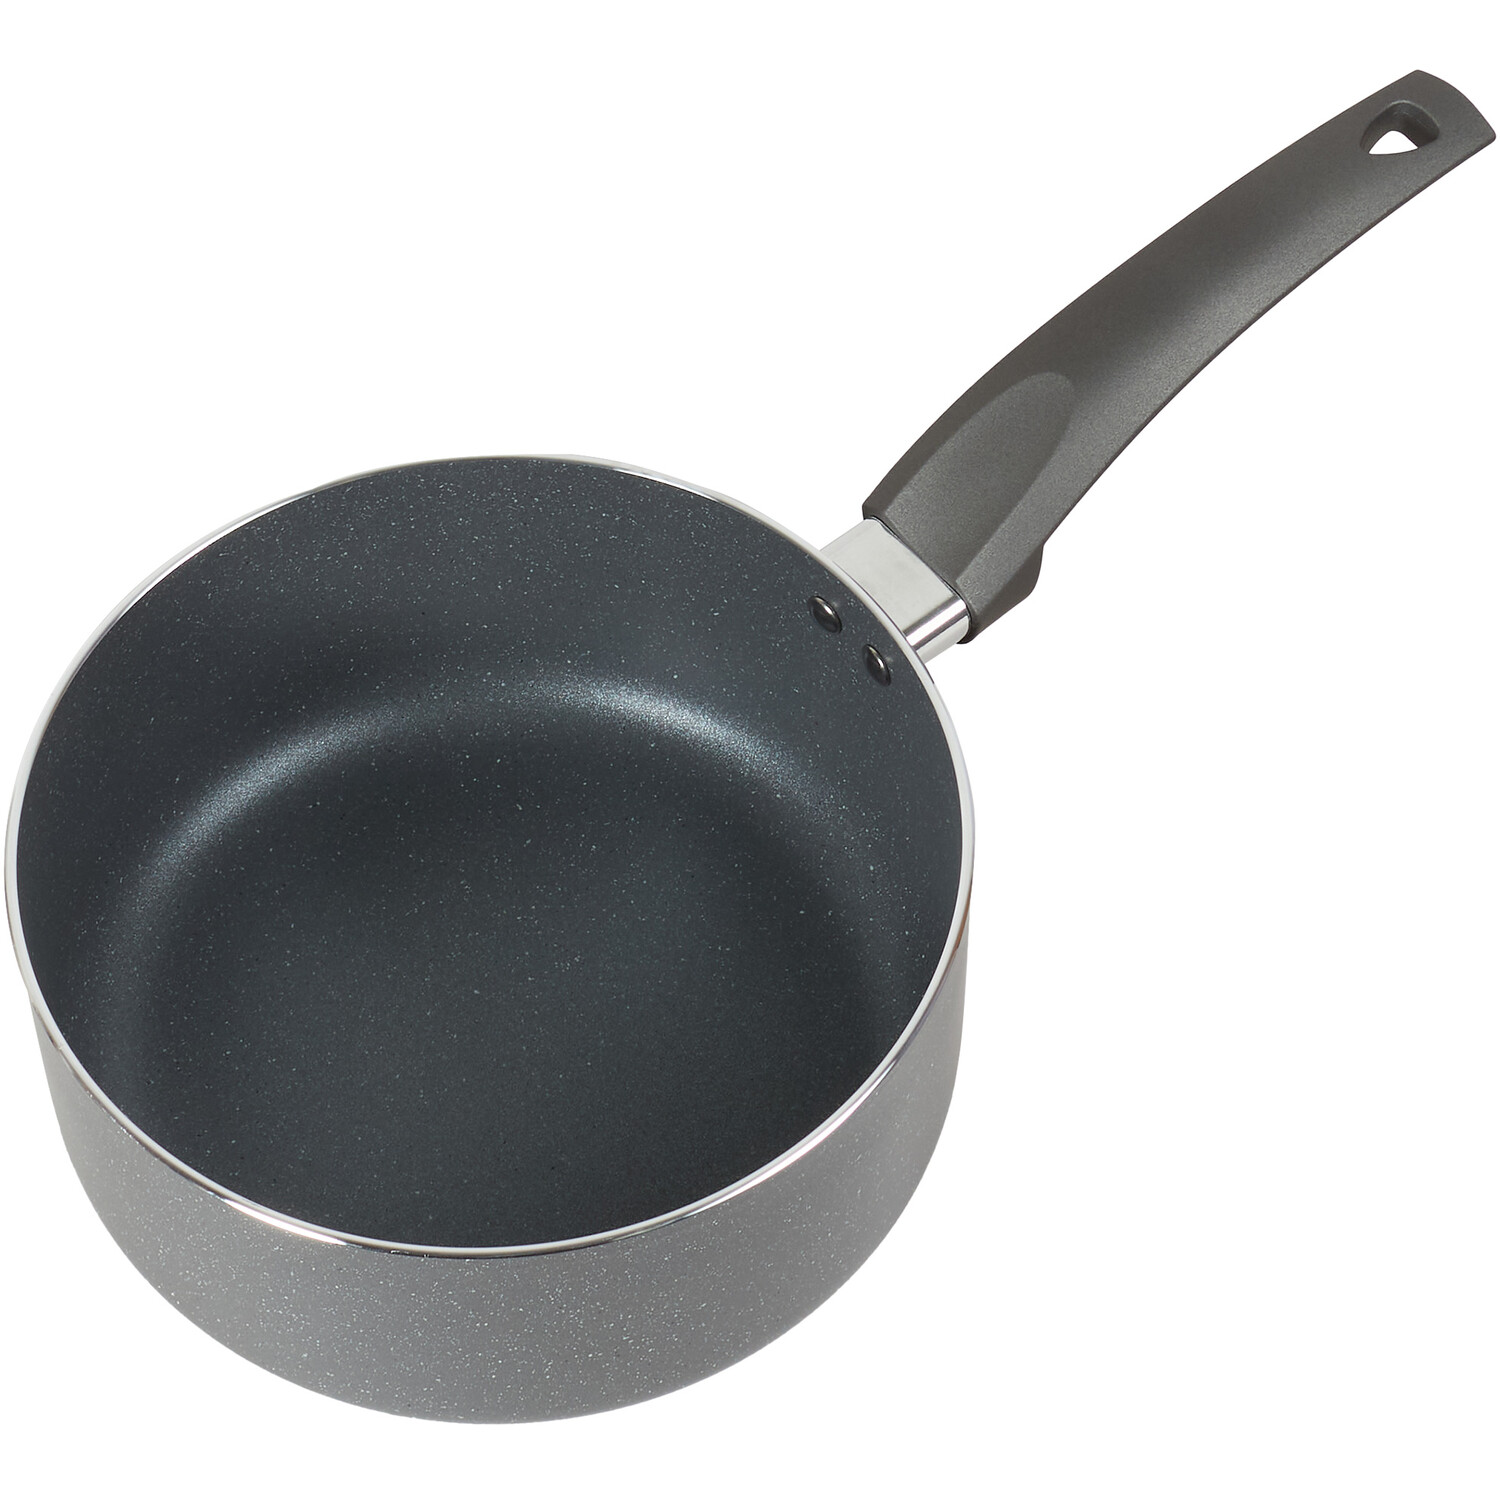 Marble Finish Saucepan with Lid - Black / Large Image 1